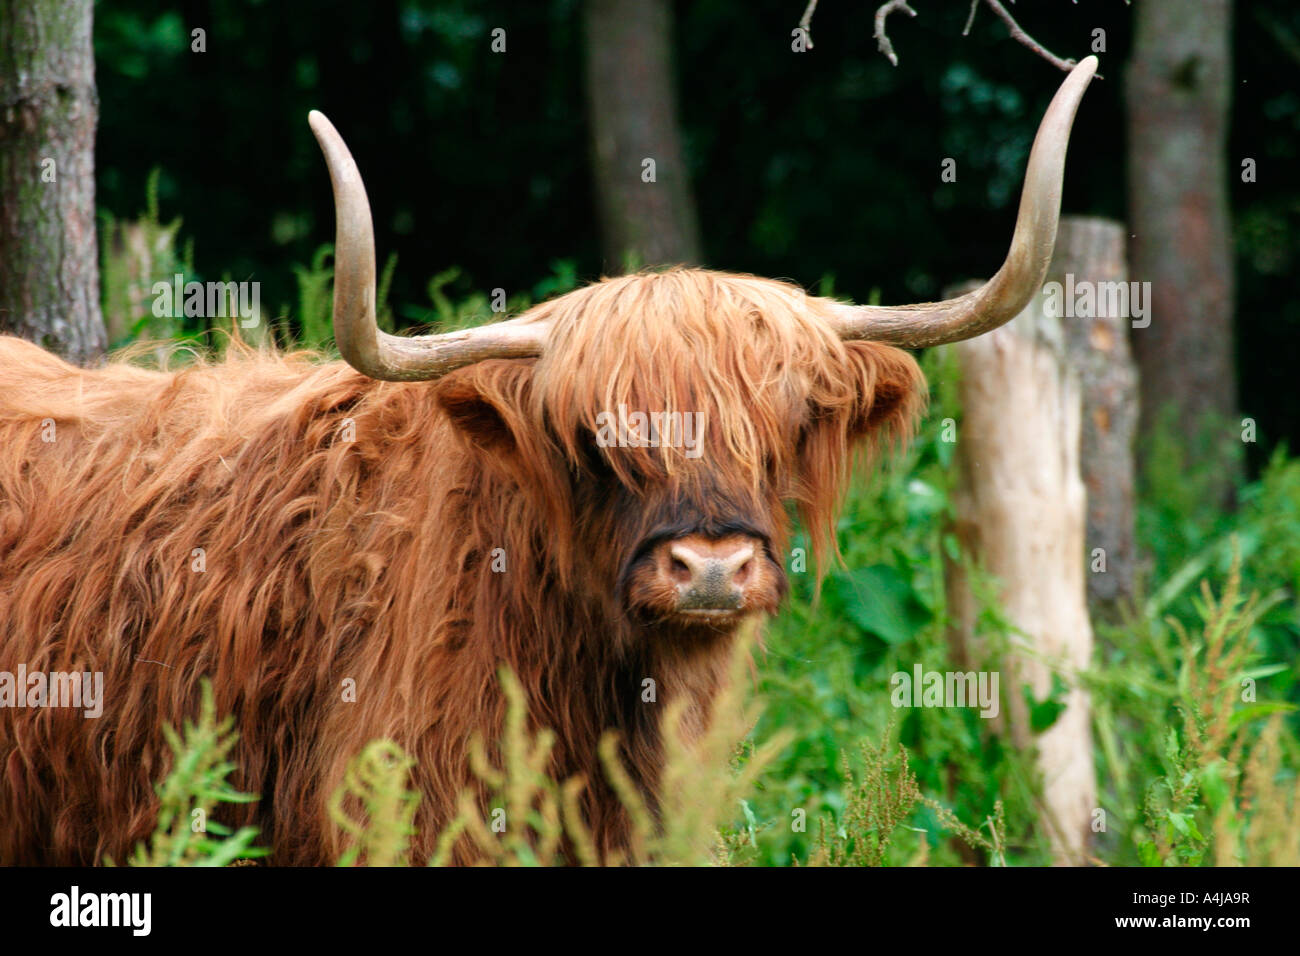 HIGH CATTLE BOVIDAE CLOSE UP FRONT VIEW Stock Photo